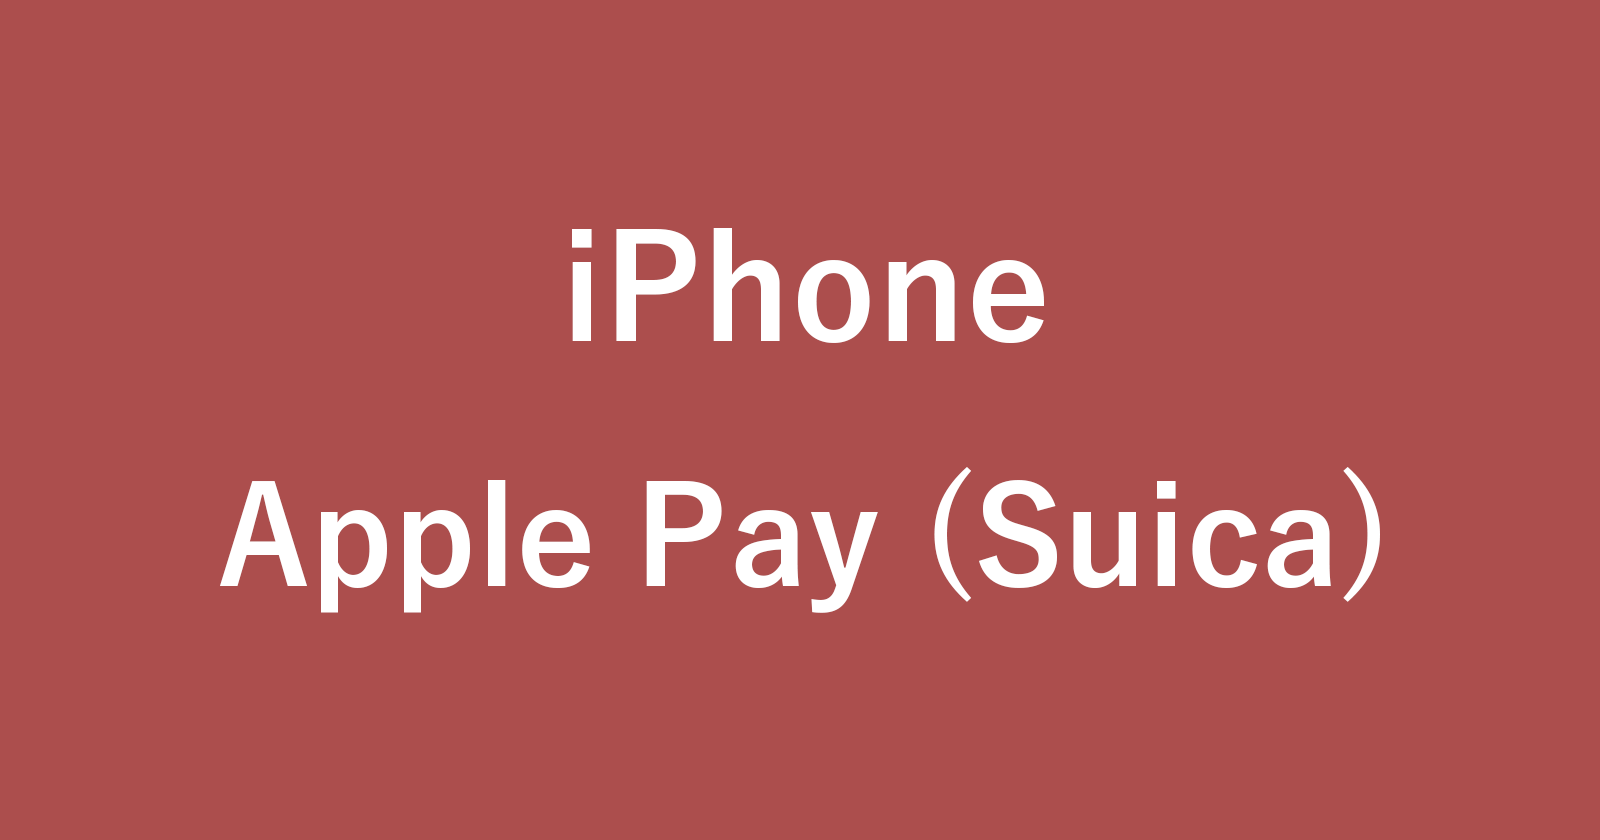 iphone apple pay suica